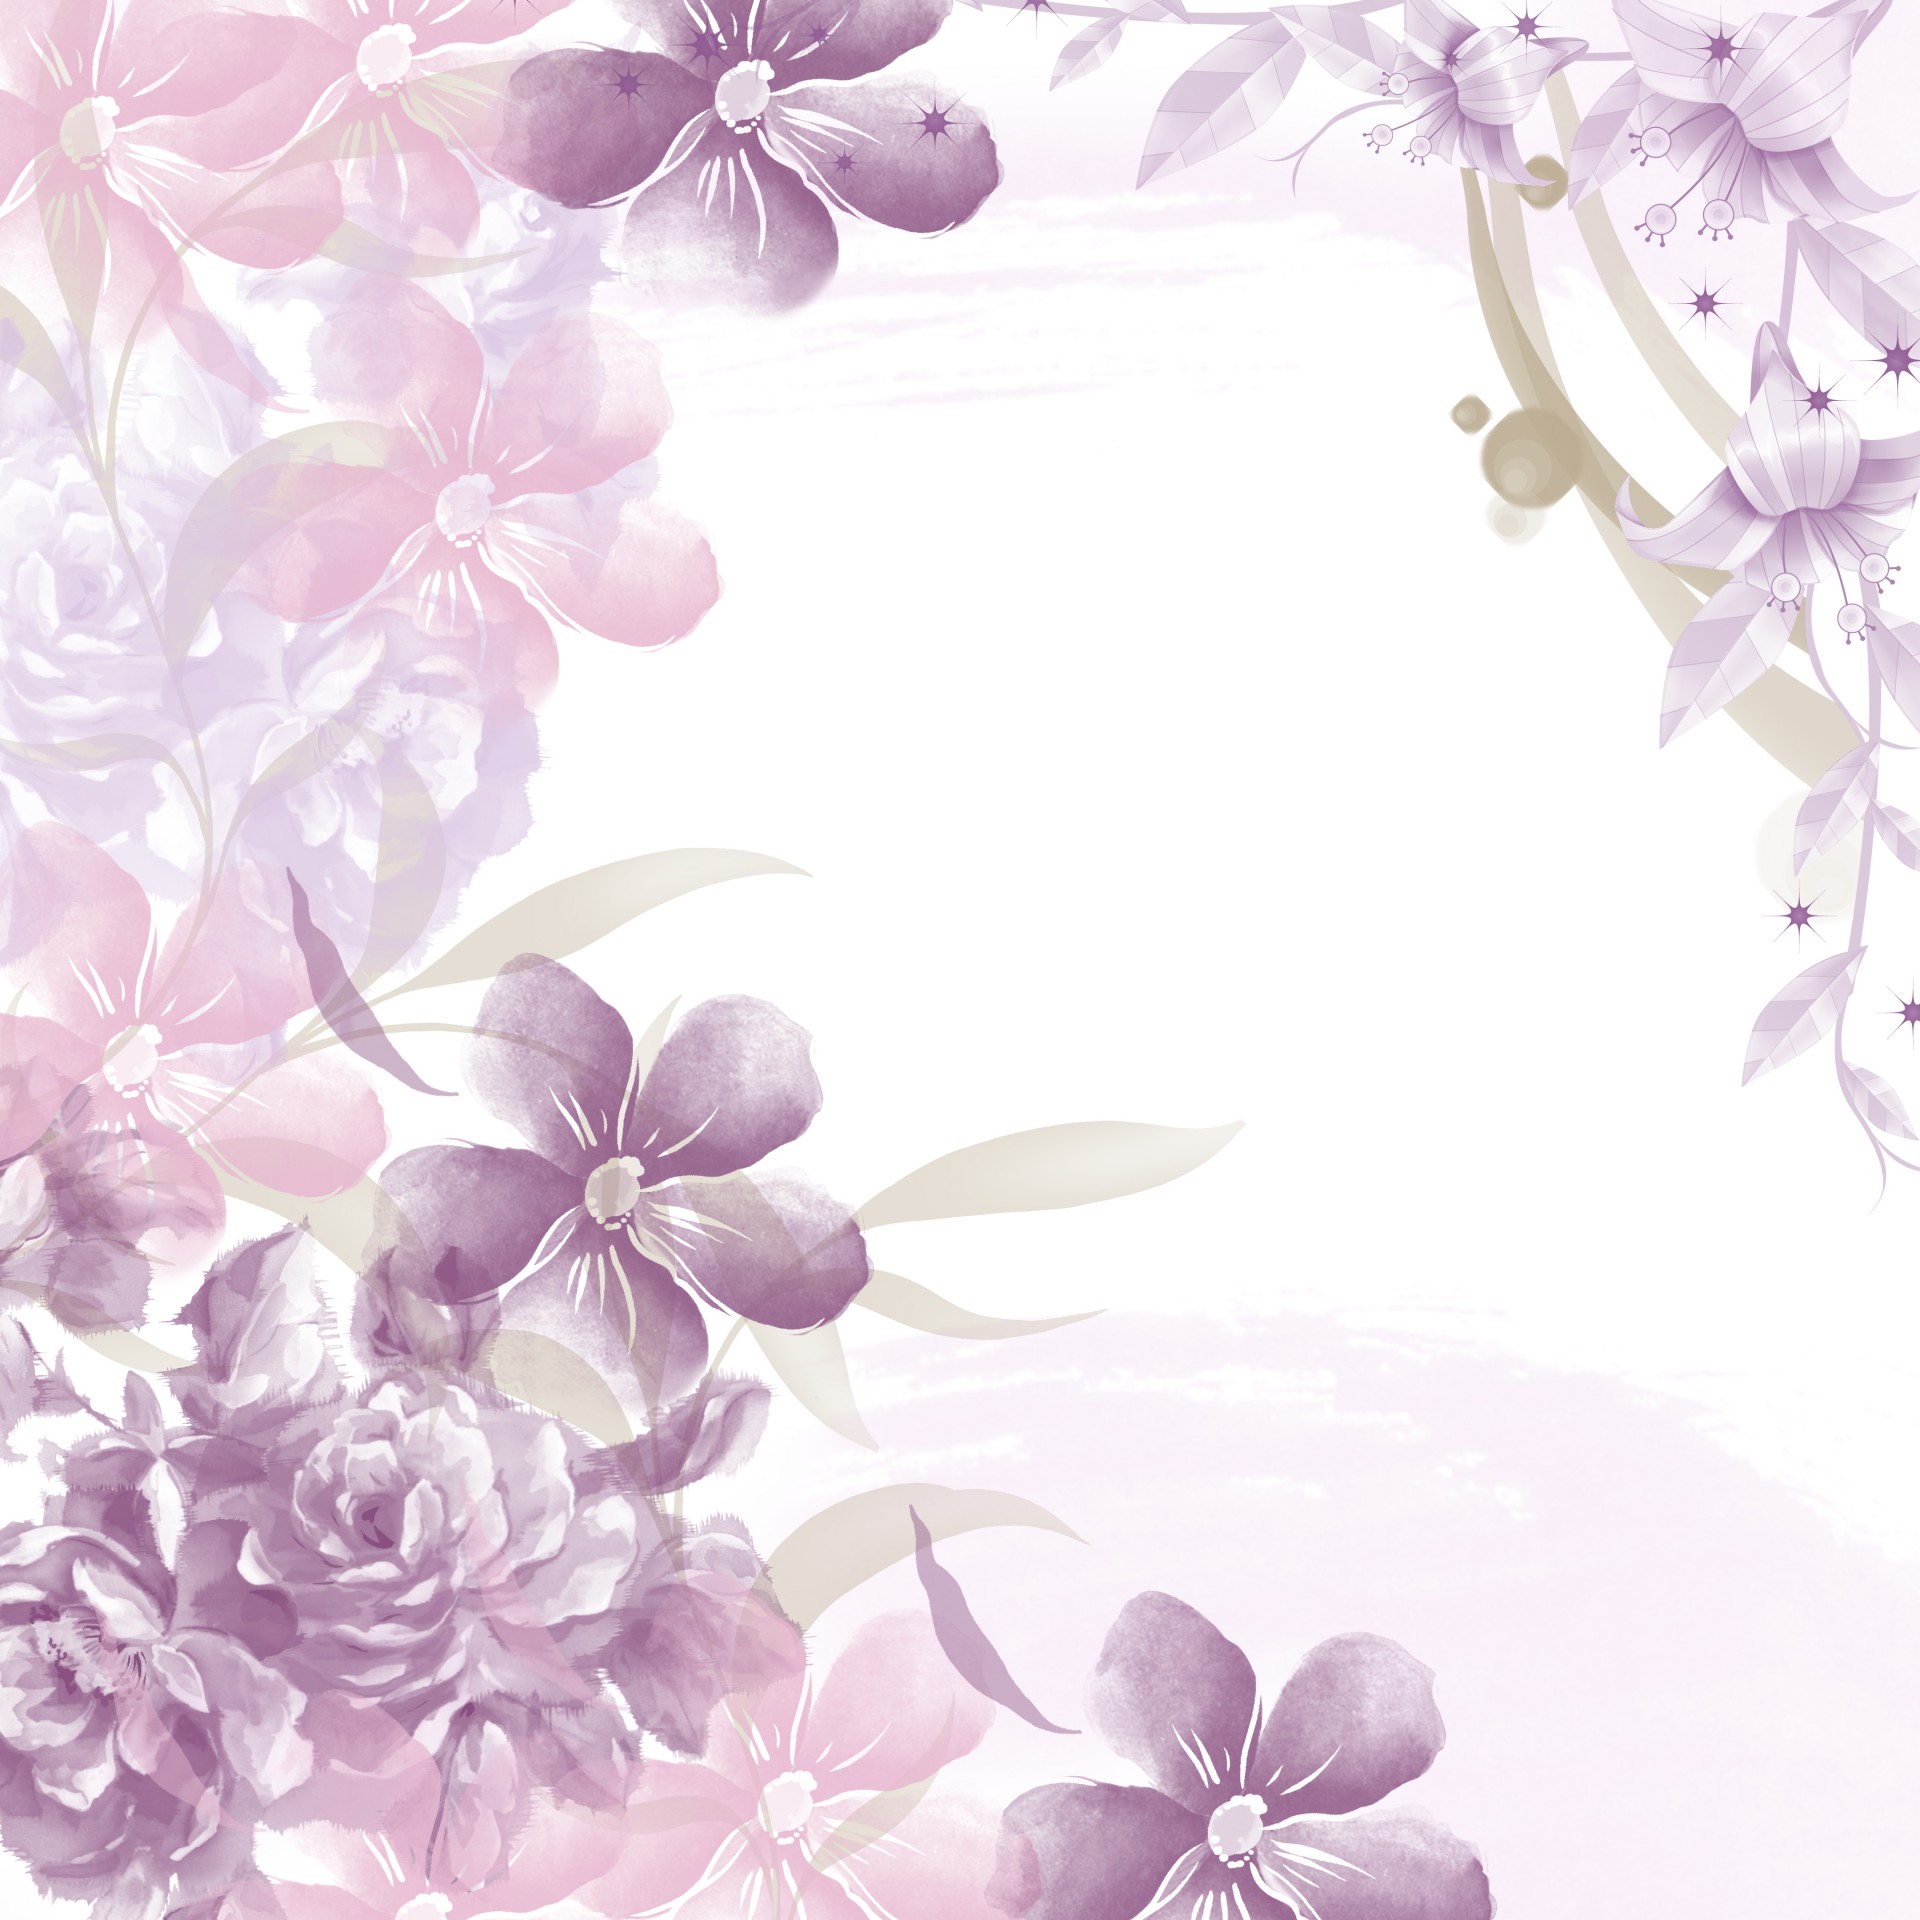 Pink Floral Greeting Card Background, or any other type of backing paper